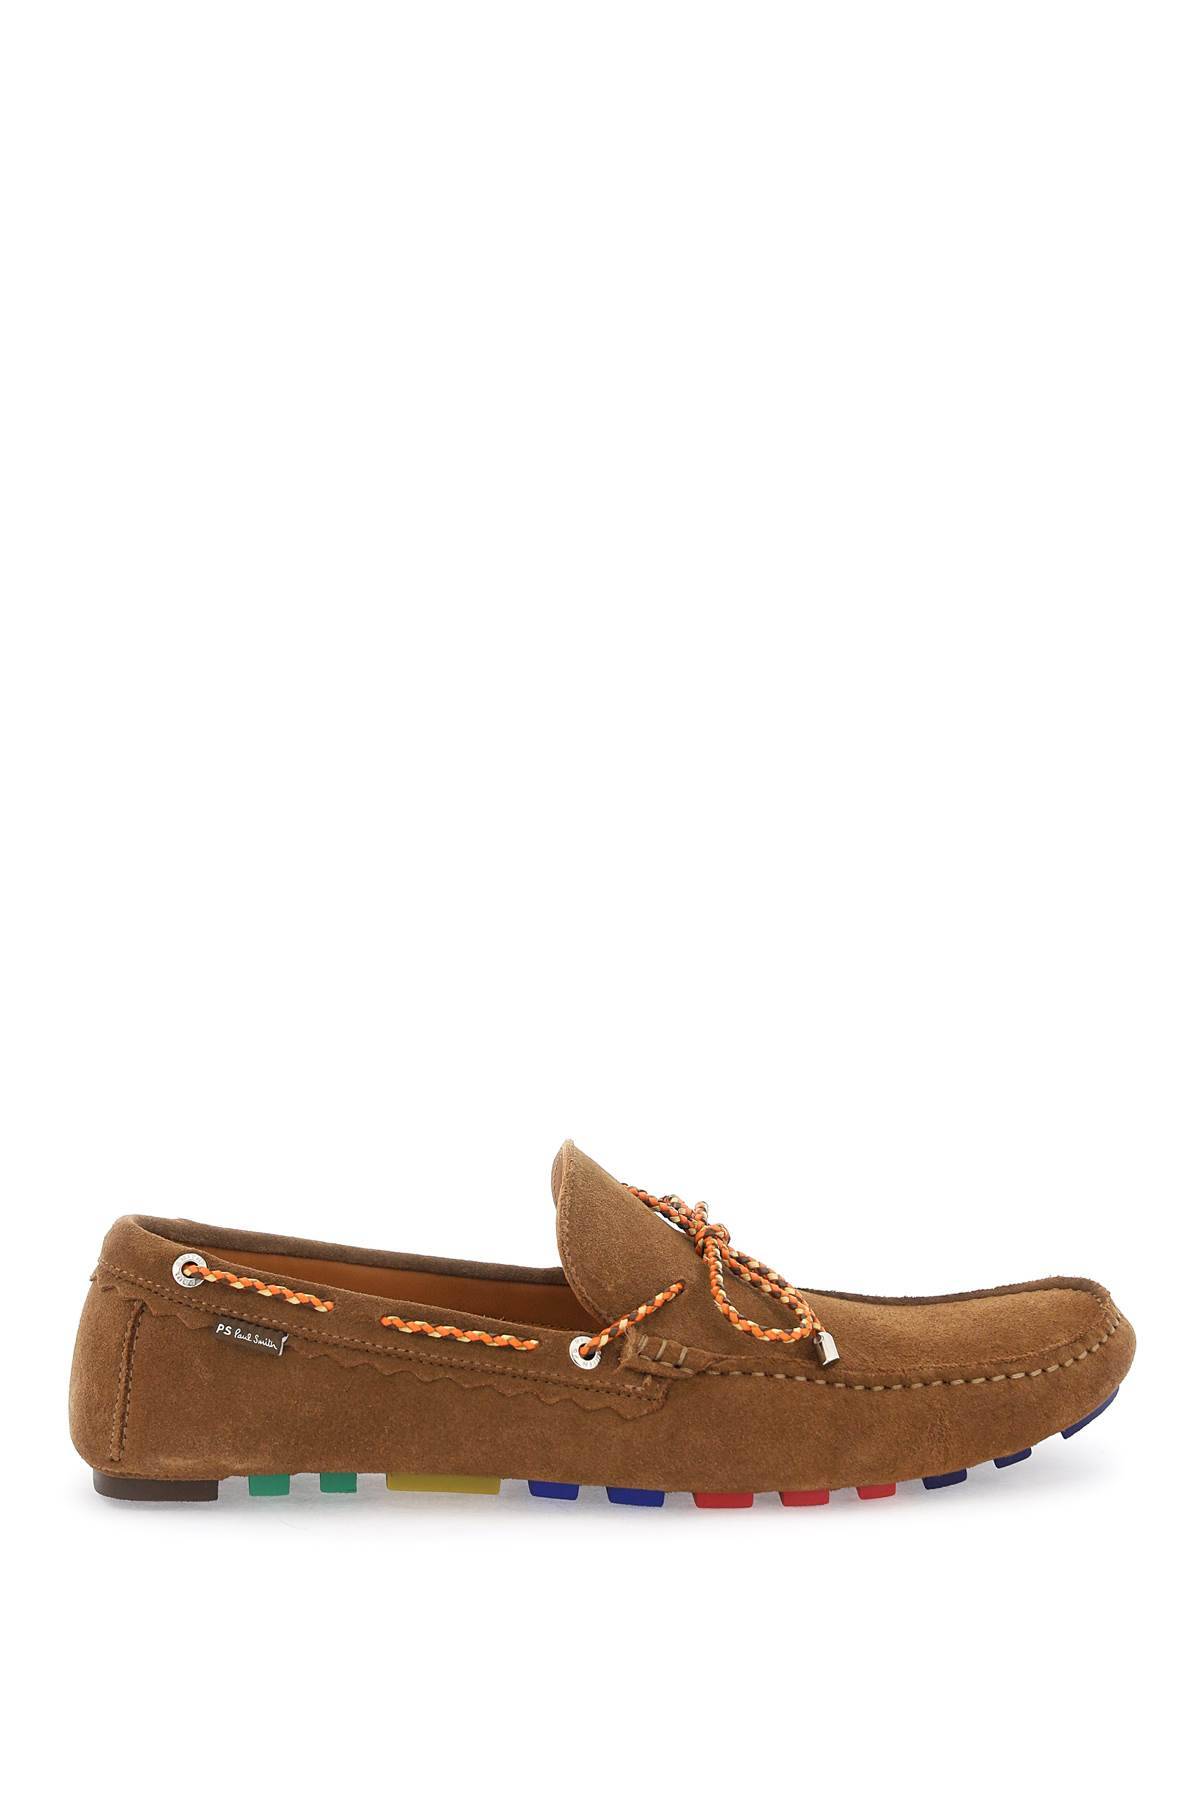 Ps Paul Smith PS PAUL SMITH springfield suede loafers